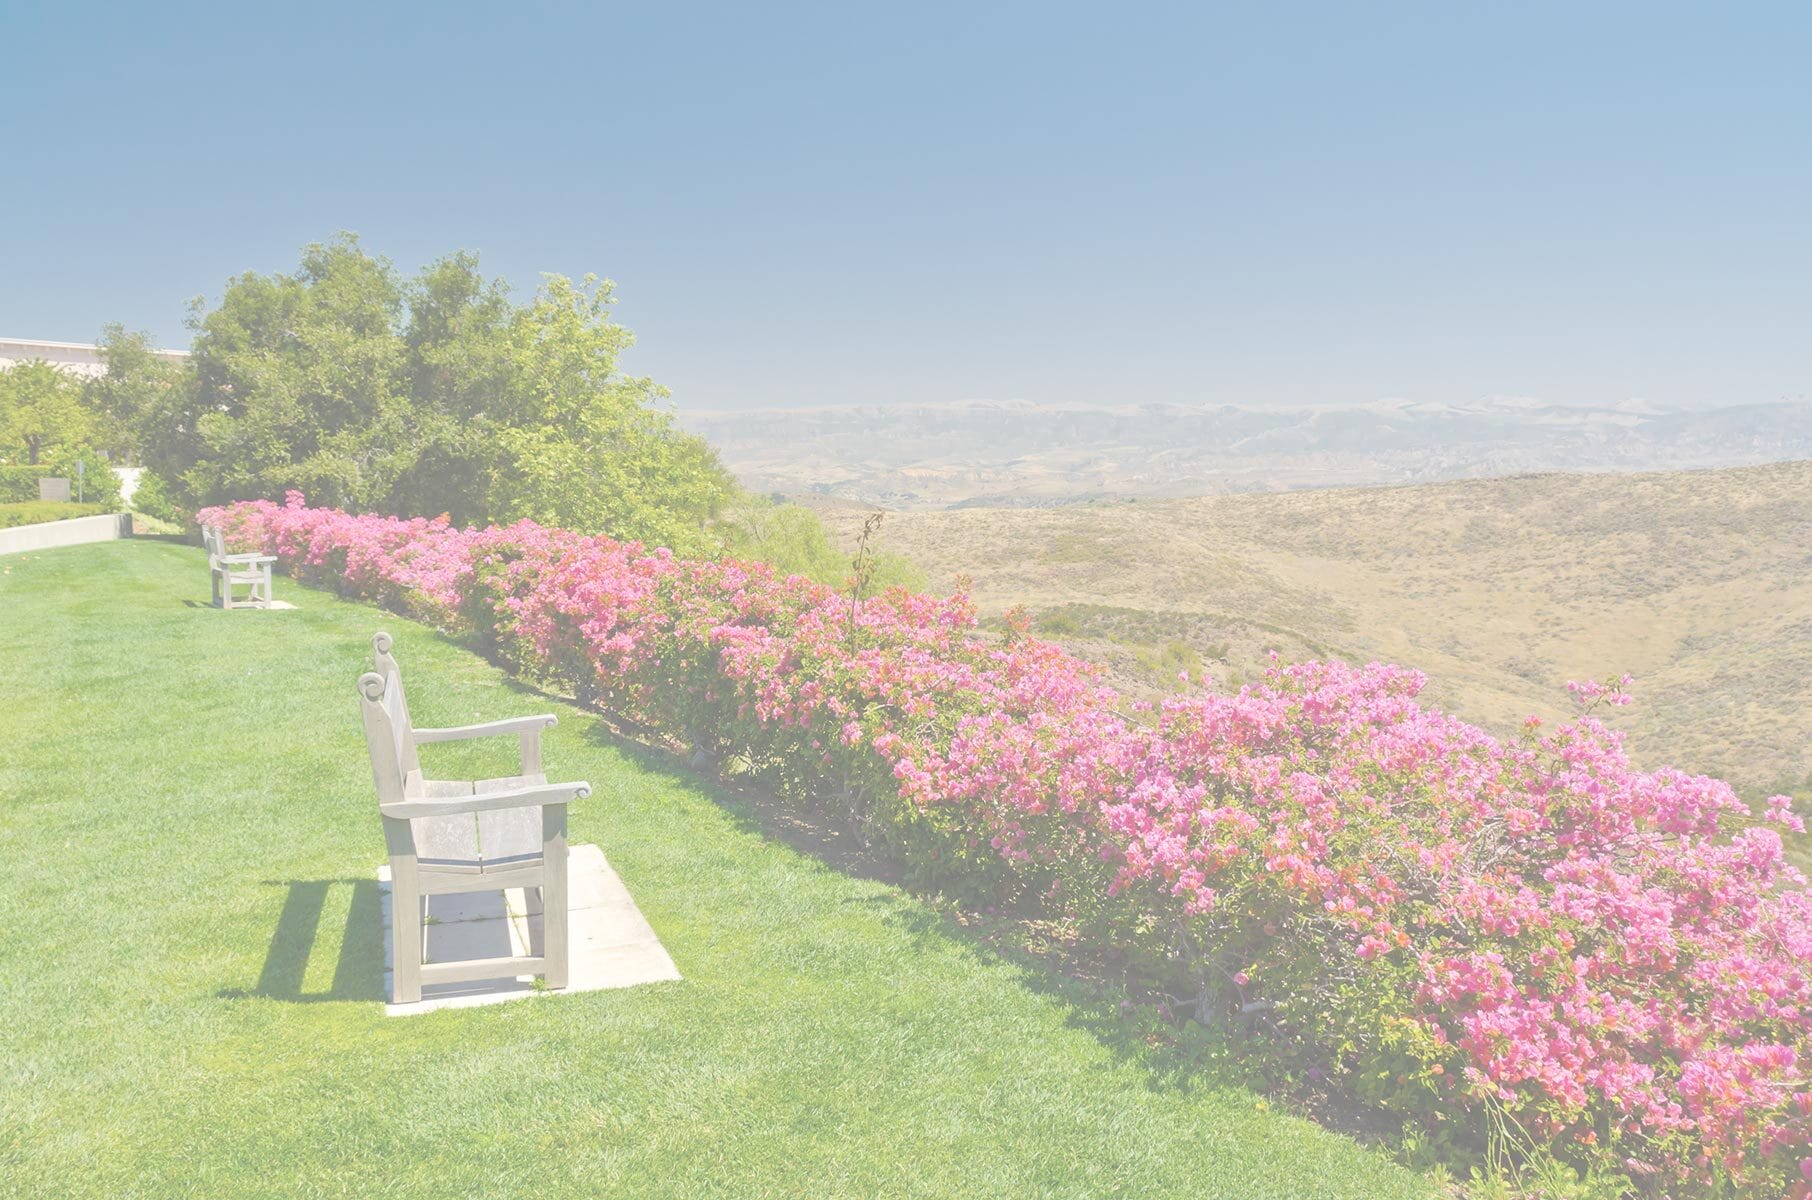 Outdoor view with benches and pink flowers overlooking Simi Valley